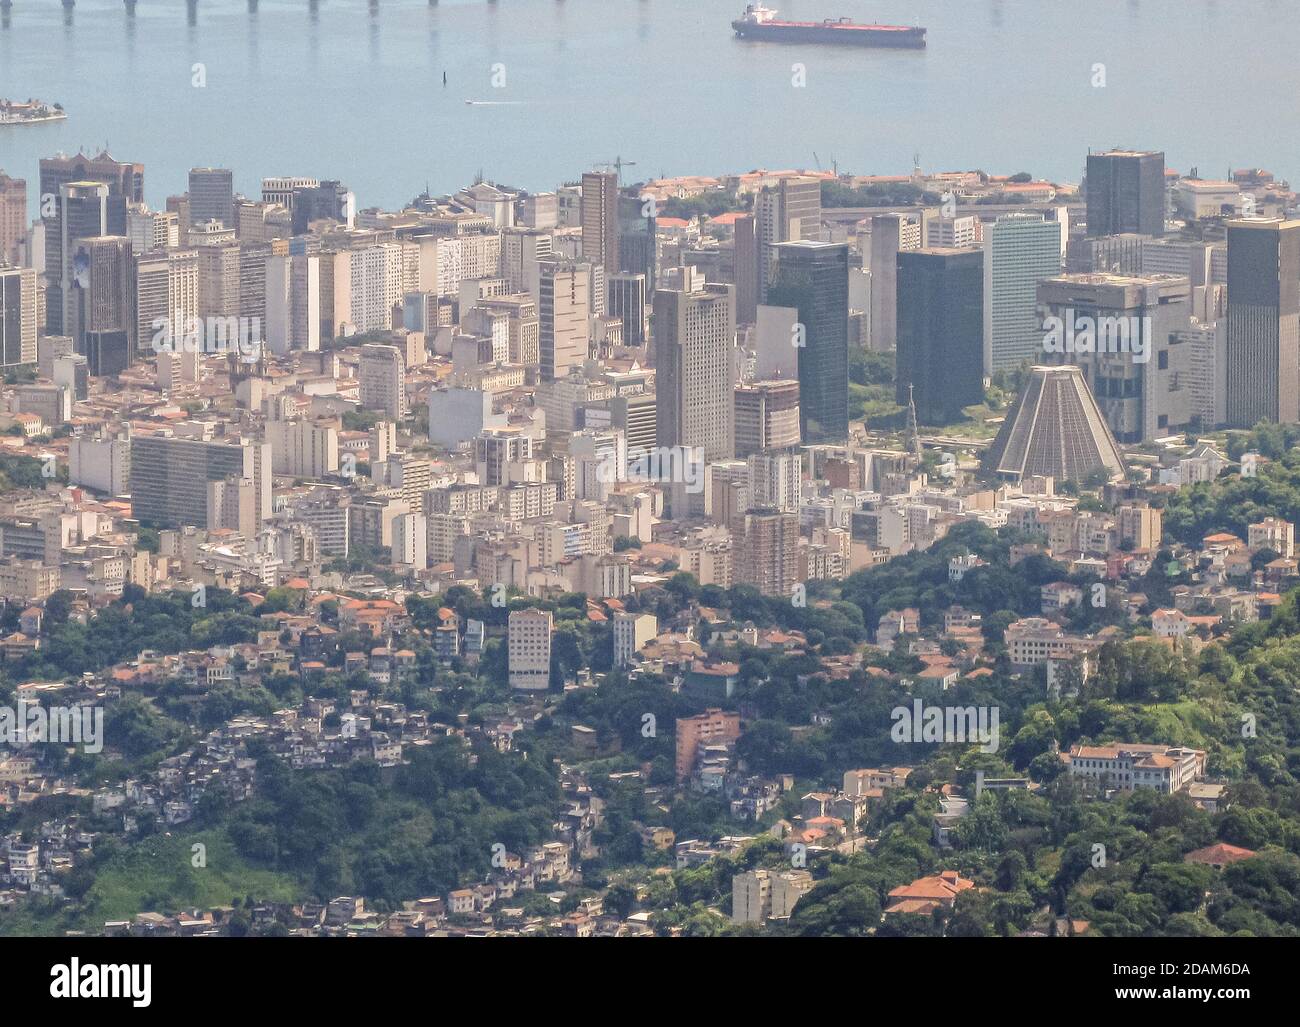 Rio de Janeiro, Brazil - December 24, 2008: Aerial view of Centro neighborhood with its high rise buildings and pyramidical Metropolitan Cathedral. Li Stock Photo